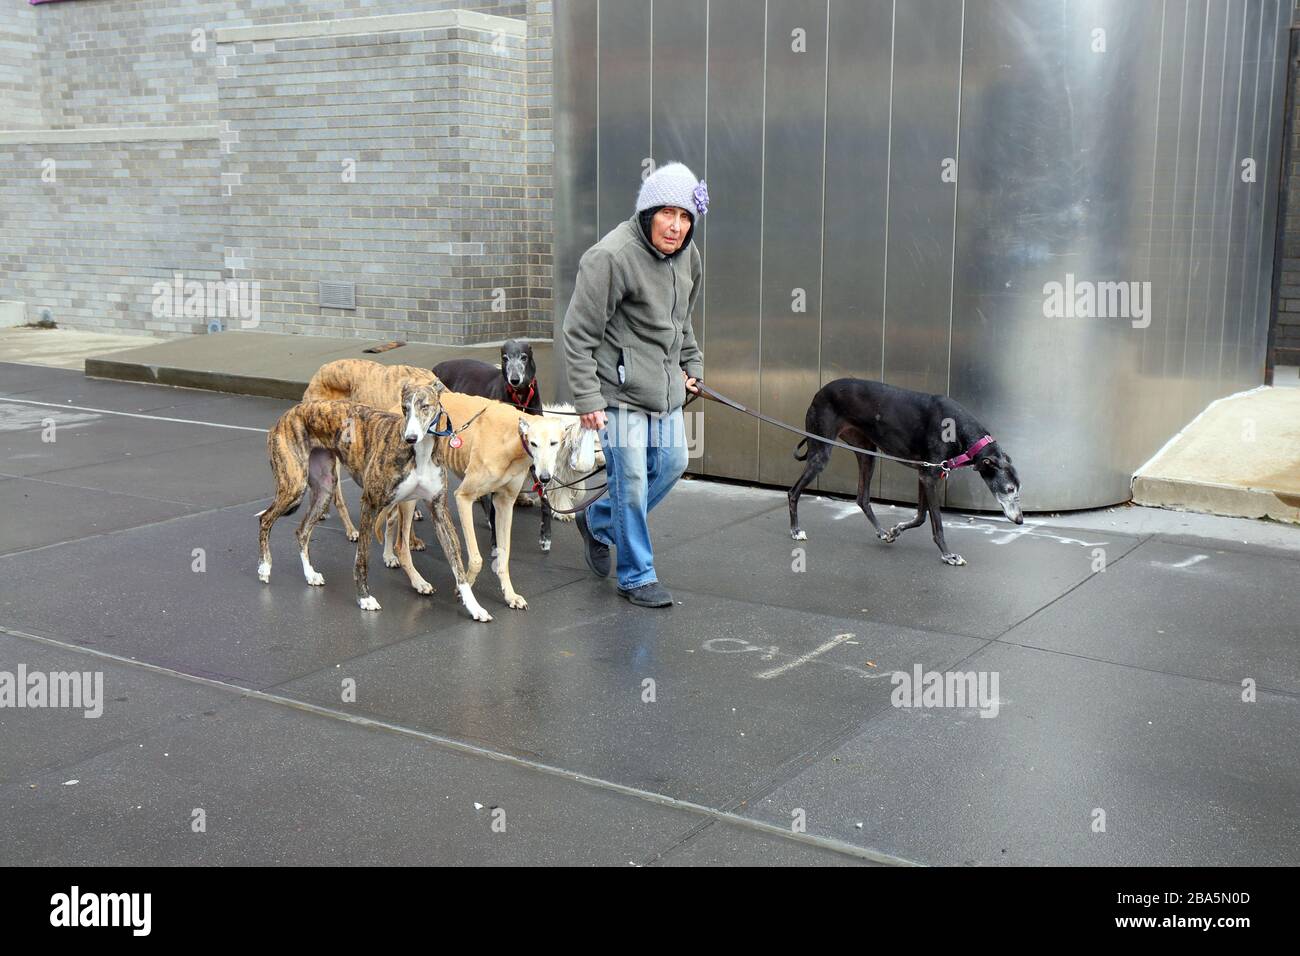 New York, NY, 25th March 2020. The mood in the City as a woman walks her several whippets during COVID-19 coronavirus pandemic. Credit: Robert K. Chin. Stock Photo